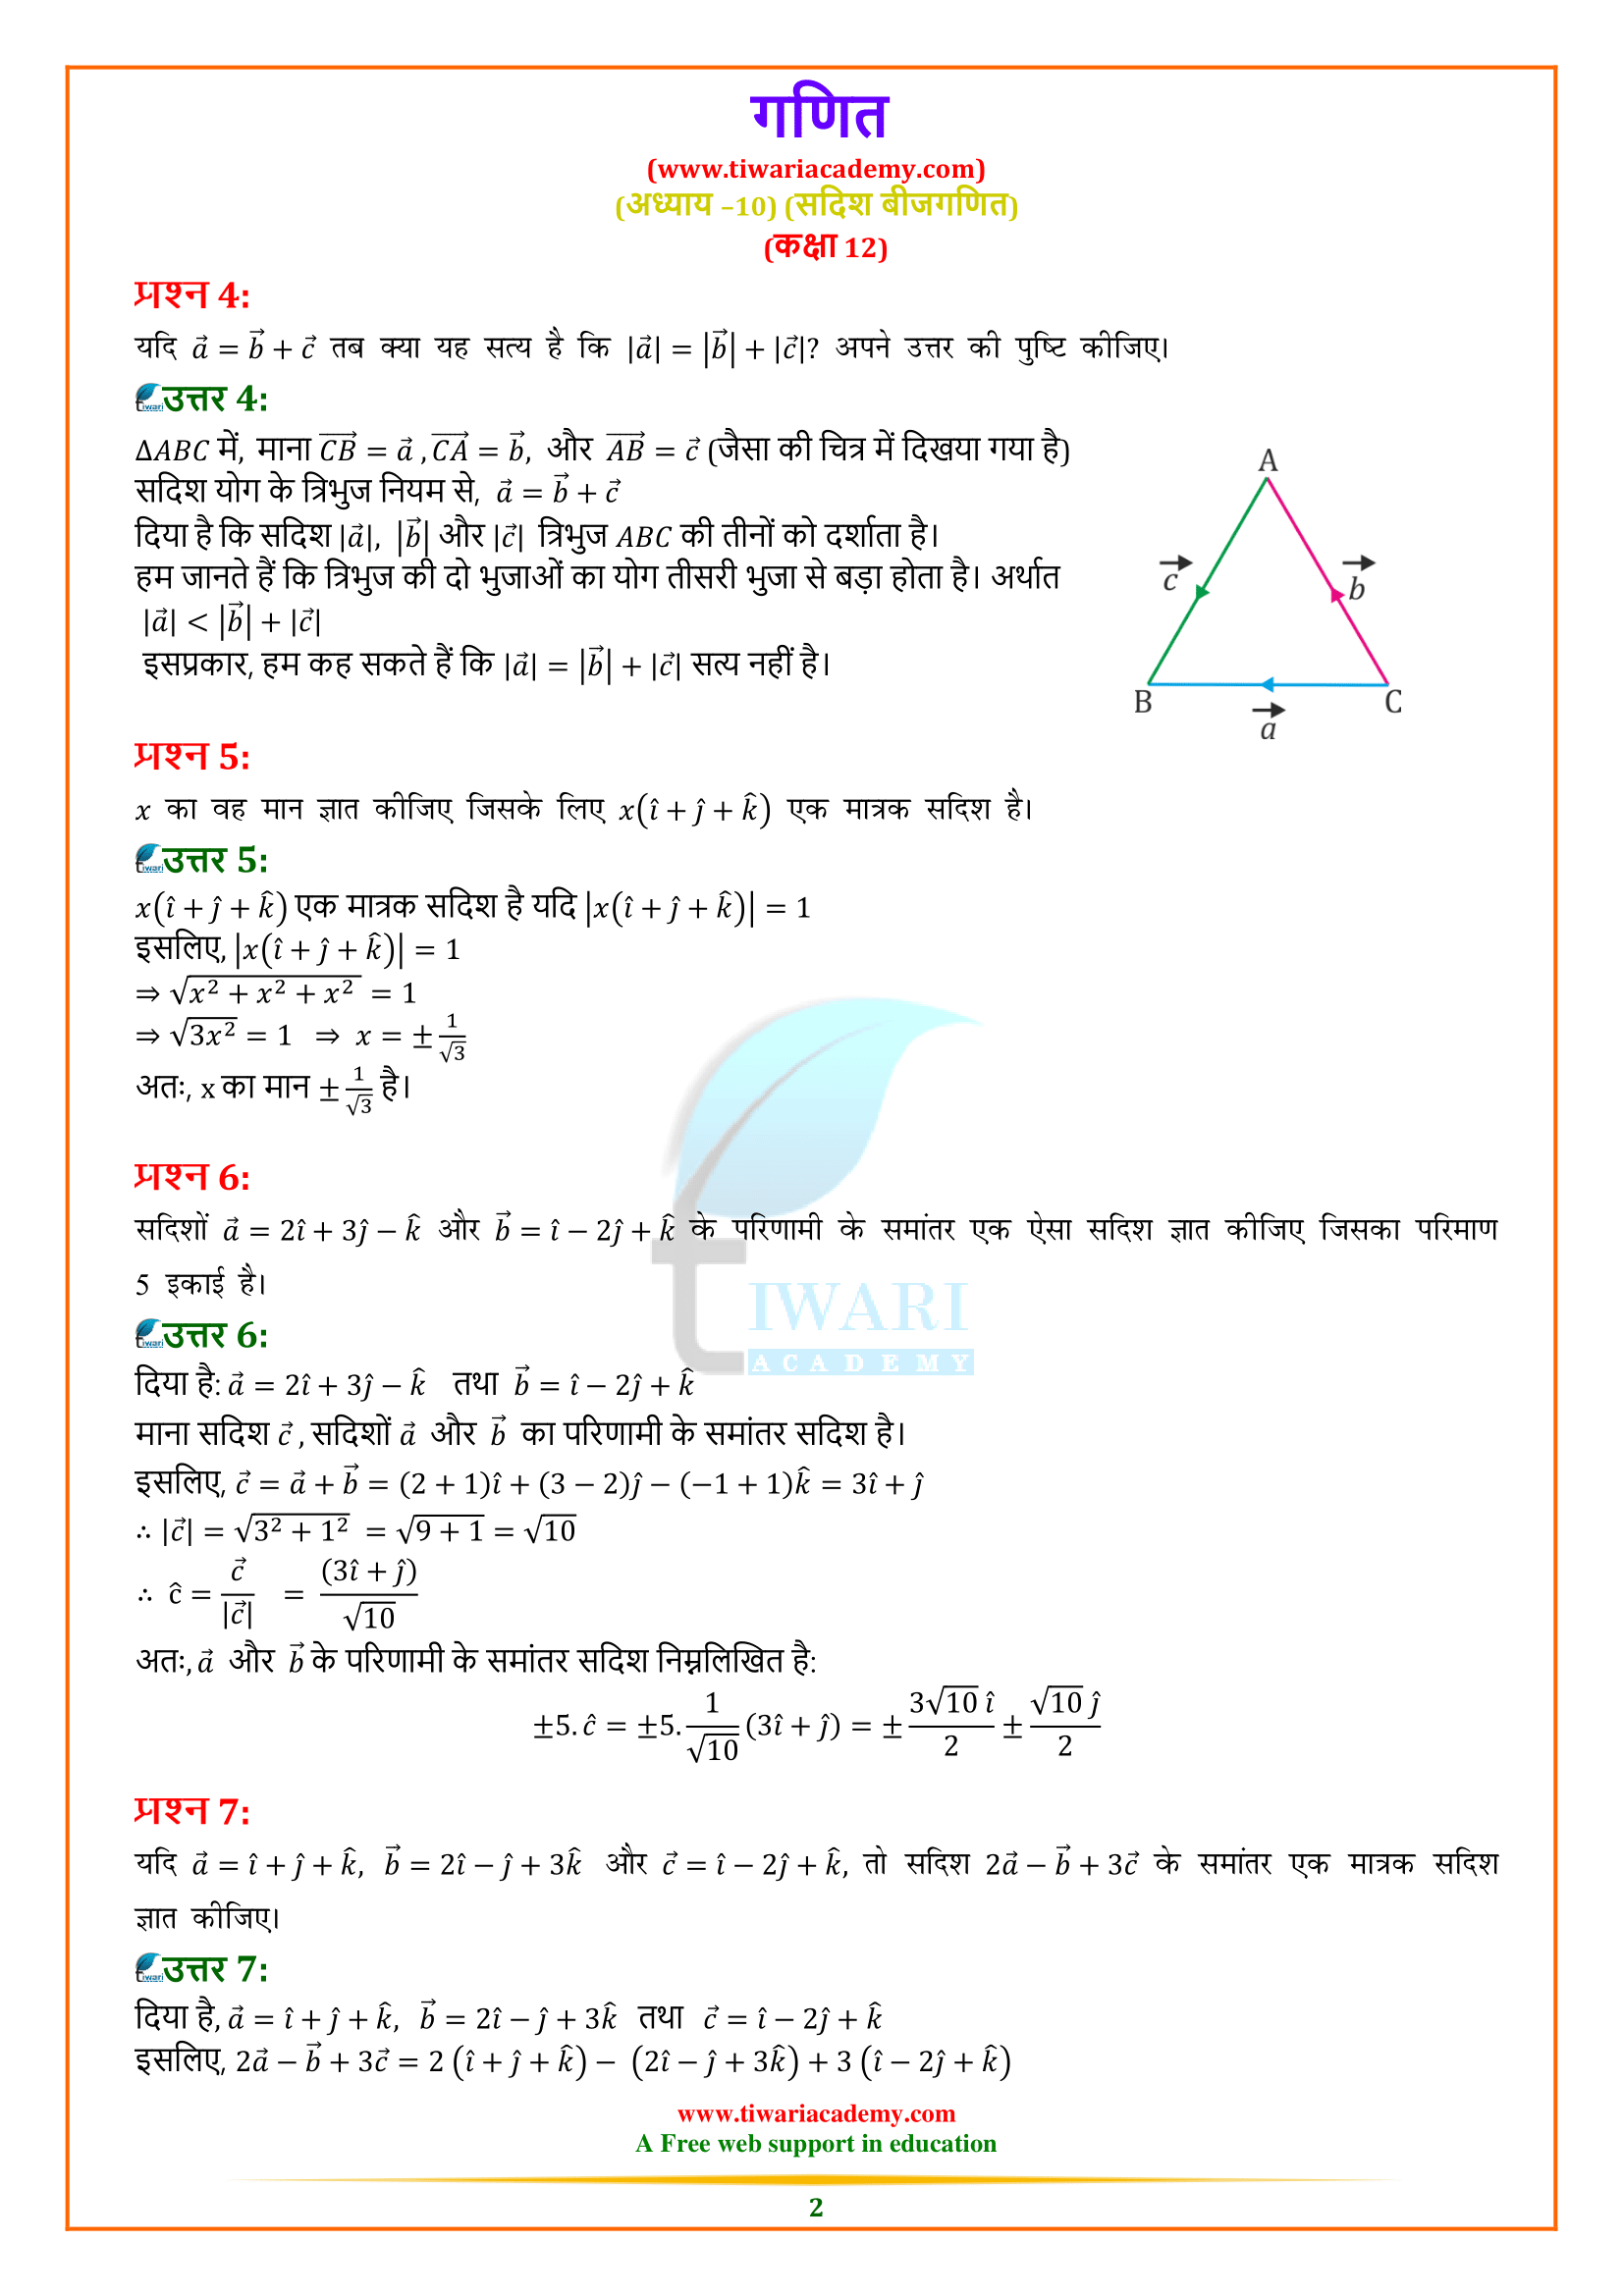 NCERT Solutions for Class 12 Maths Chapter 10 Miscellaneous Exercise in Hindi for up board